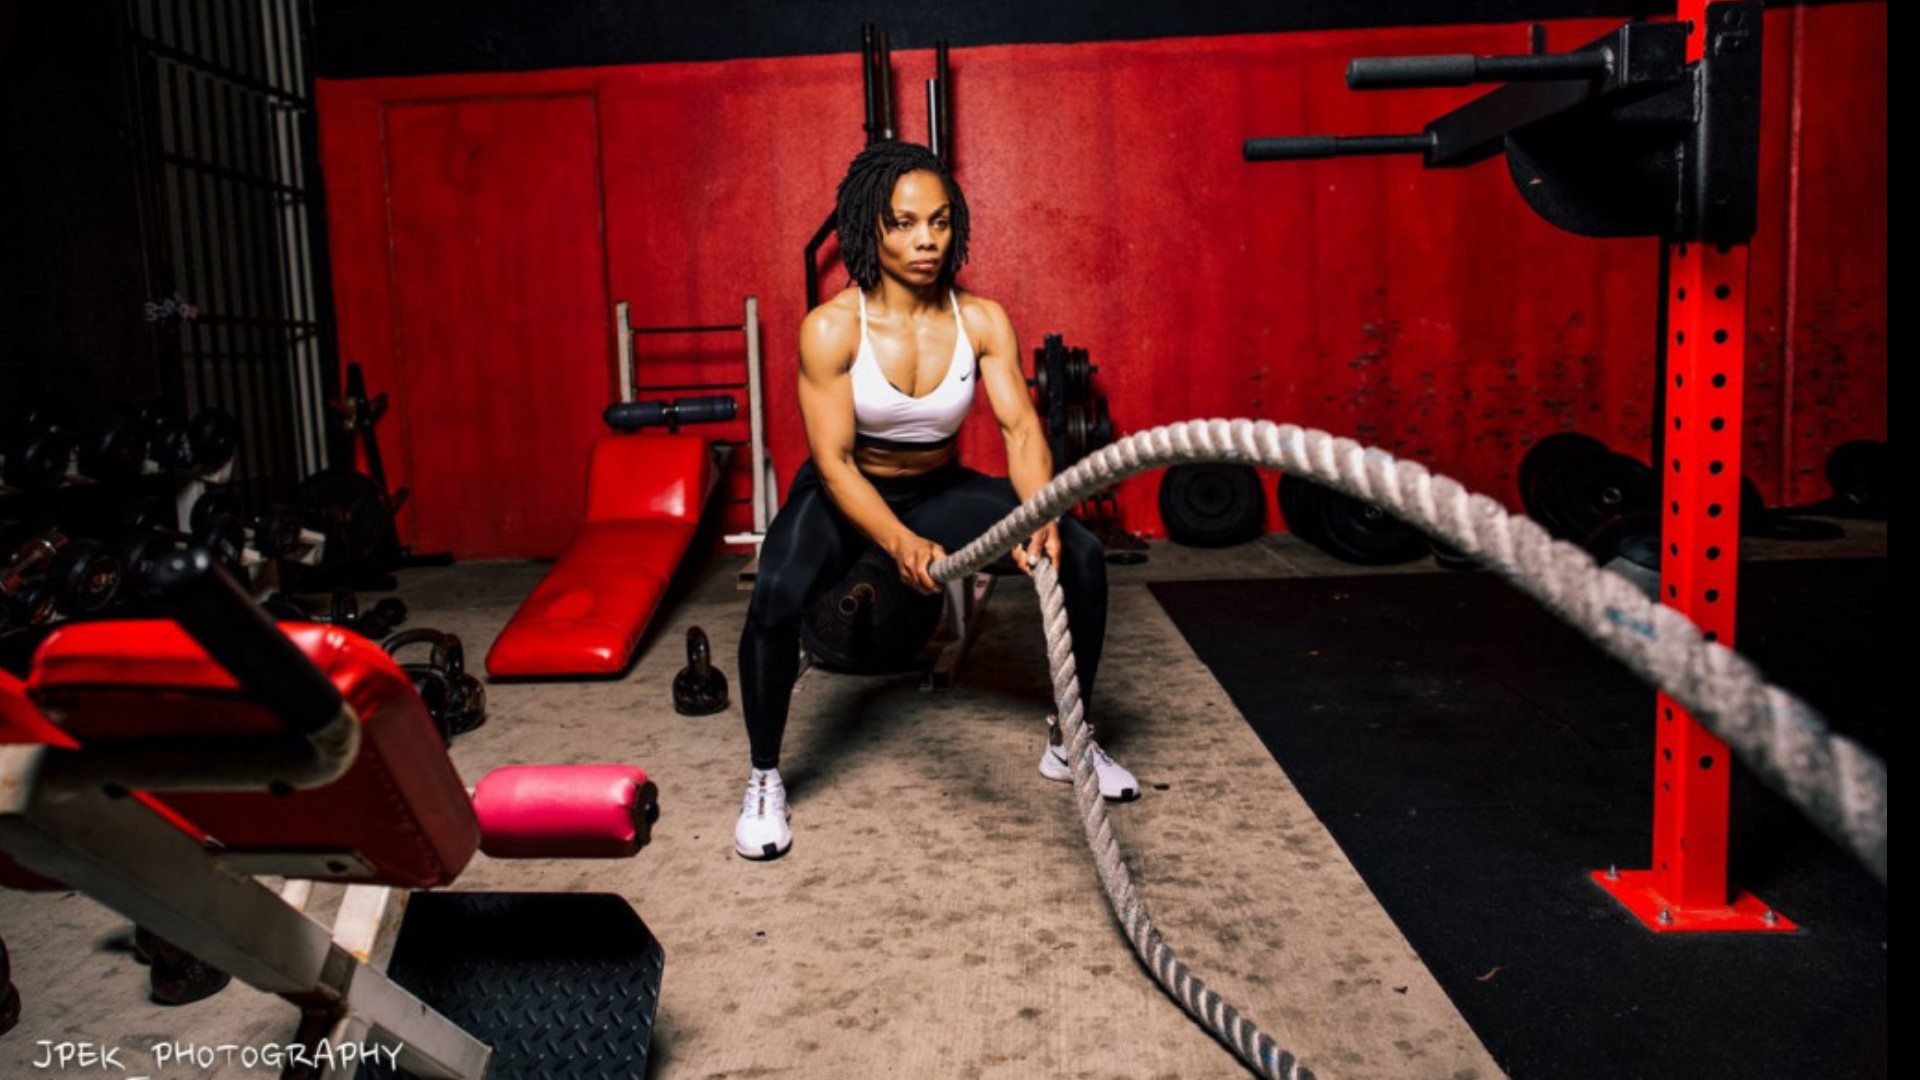 A Killeen mother of 4 and veteran is showing that it's never too late to follow your dreams by becoming a semi-finalist in a nationwide fitness competition.